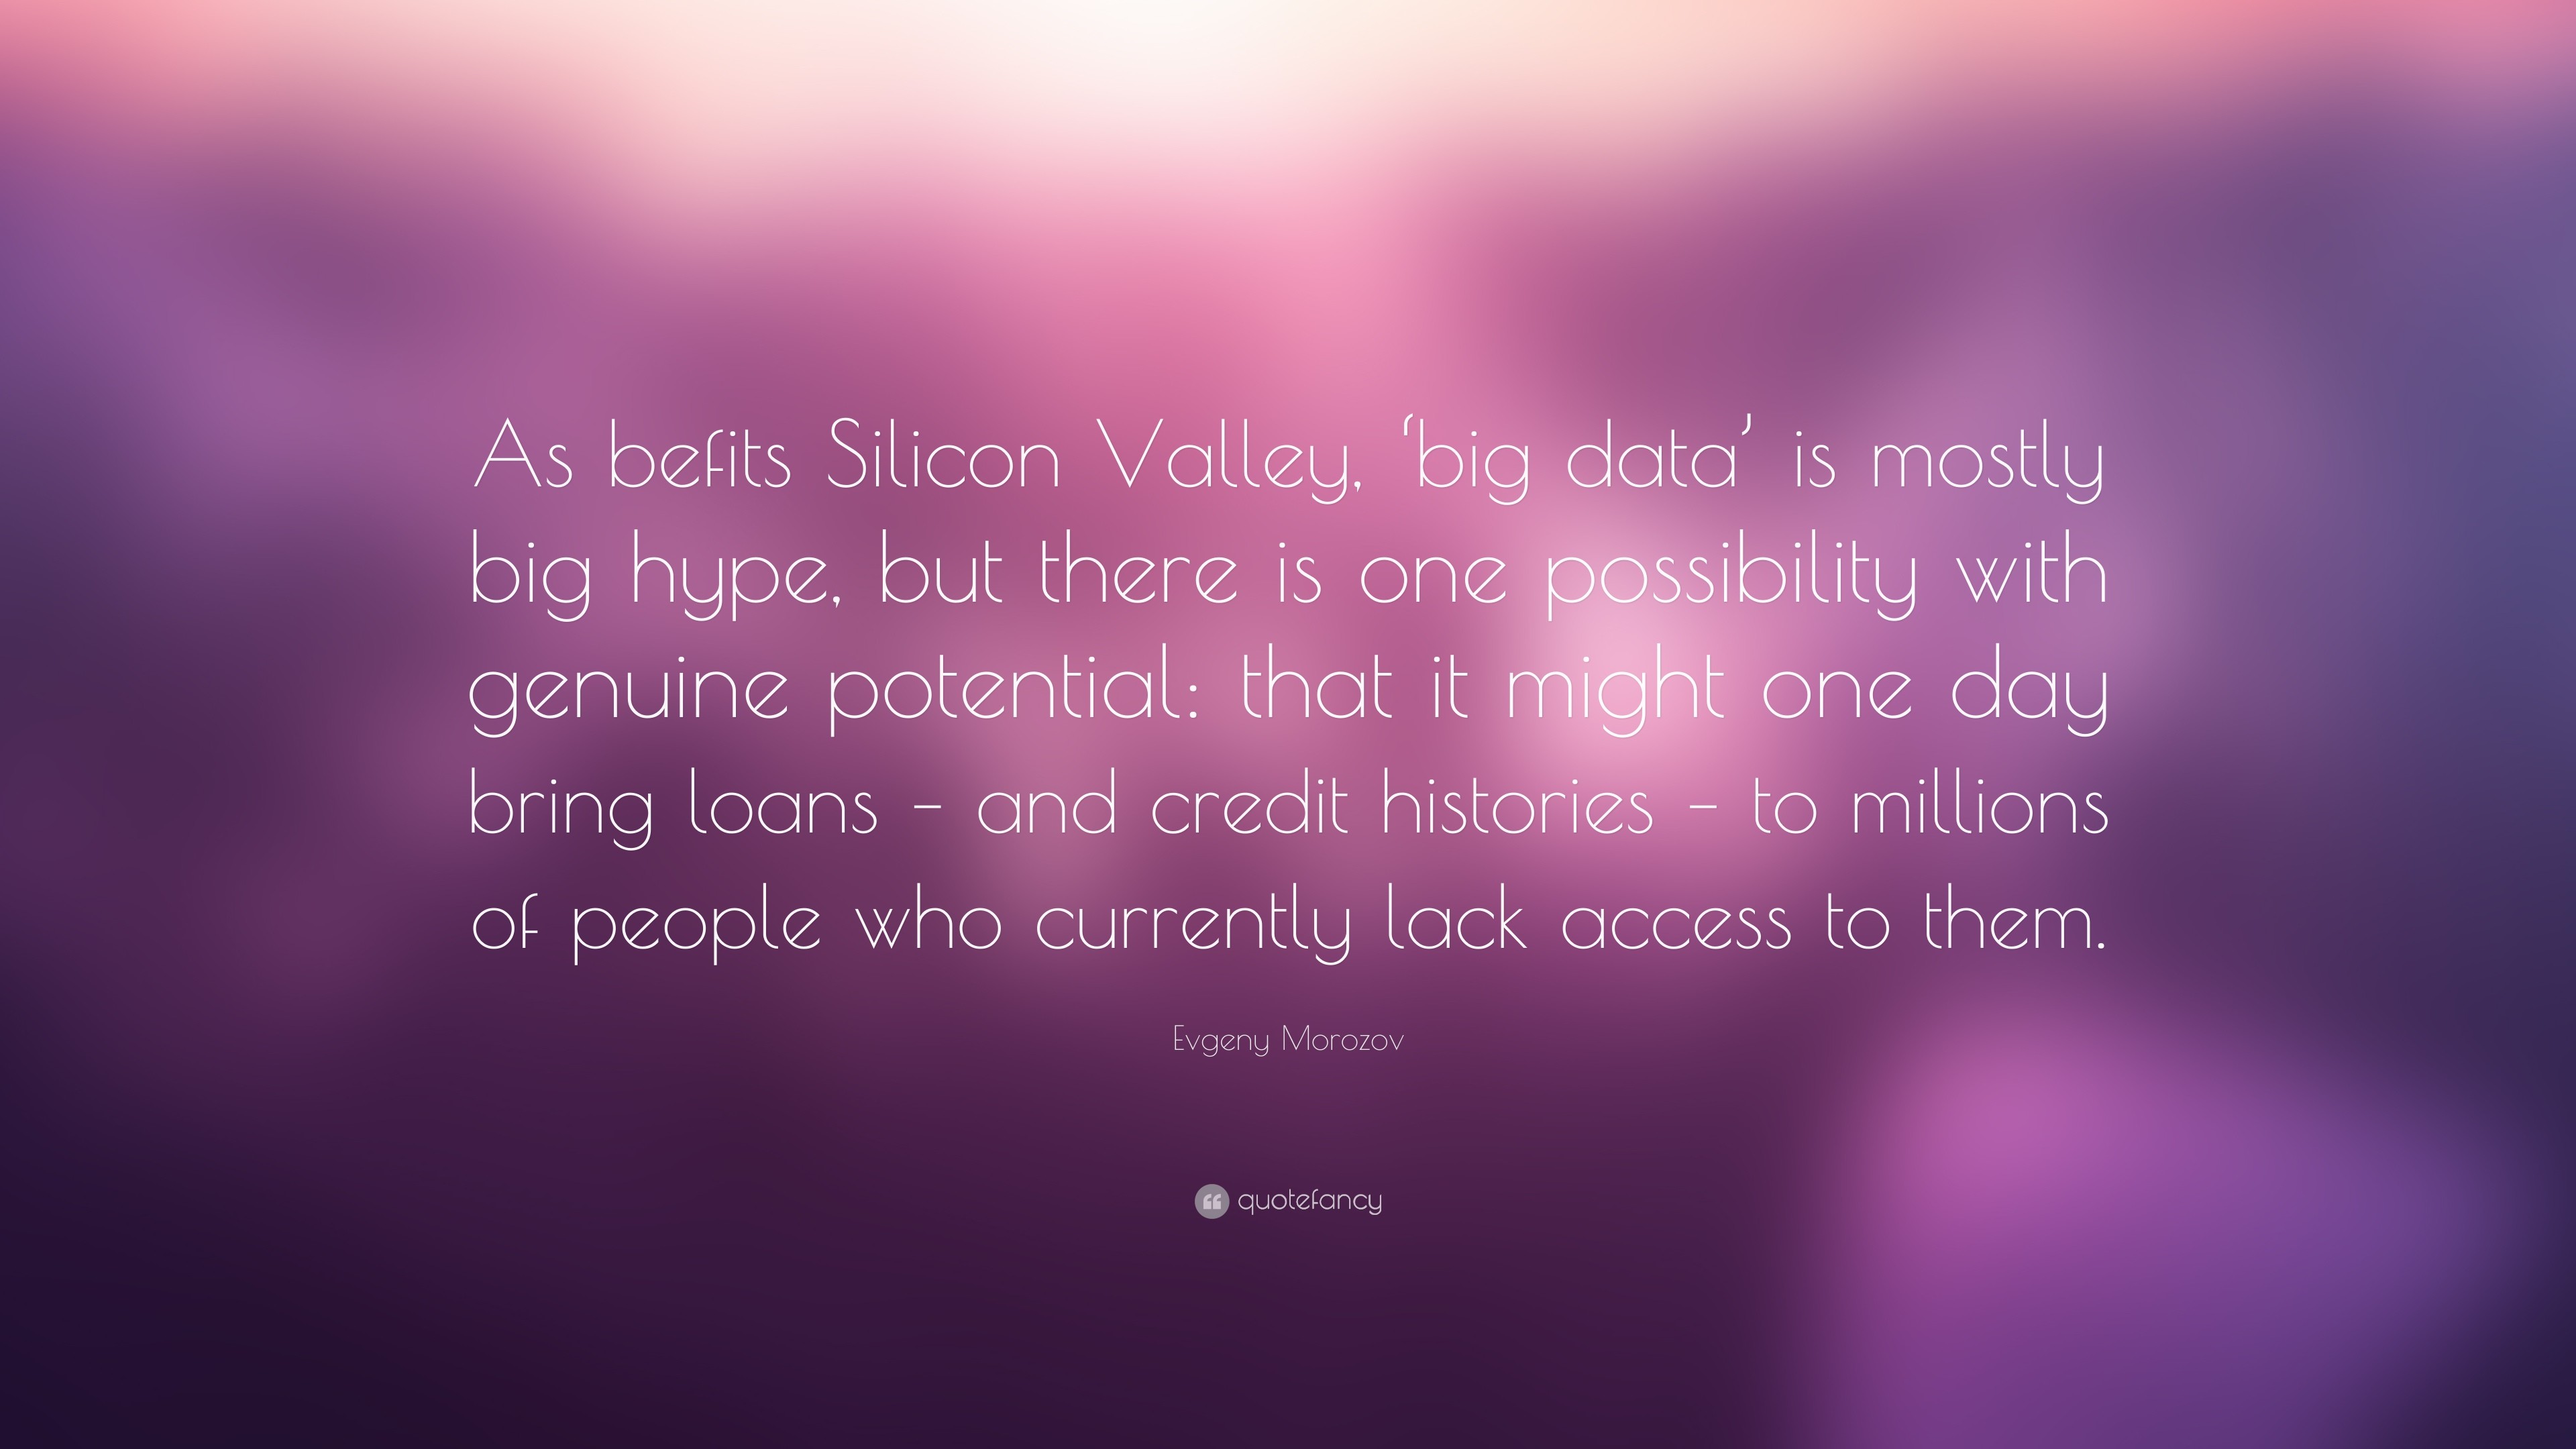 3840x2160 Evgeny Morozov Quote: “As befits Silicon Valley, 'big data' is mostly